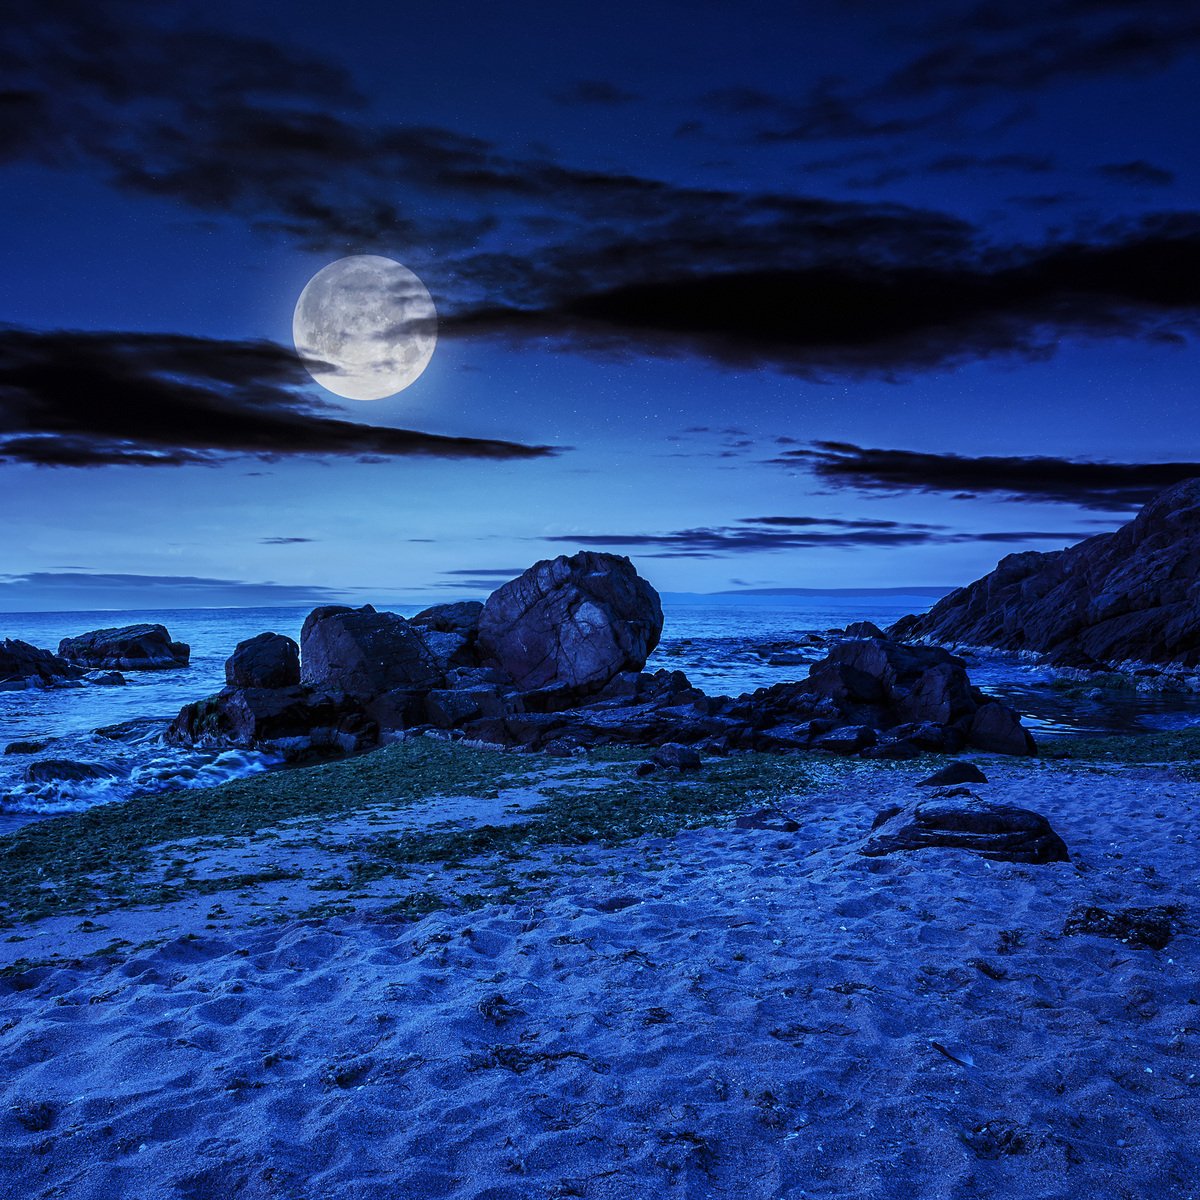 the full moon is rising above the rocky beach